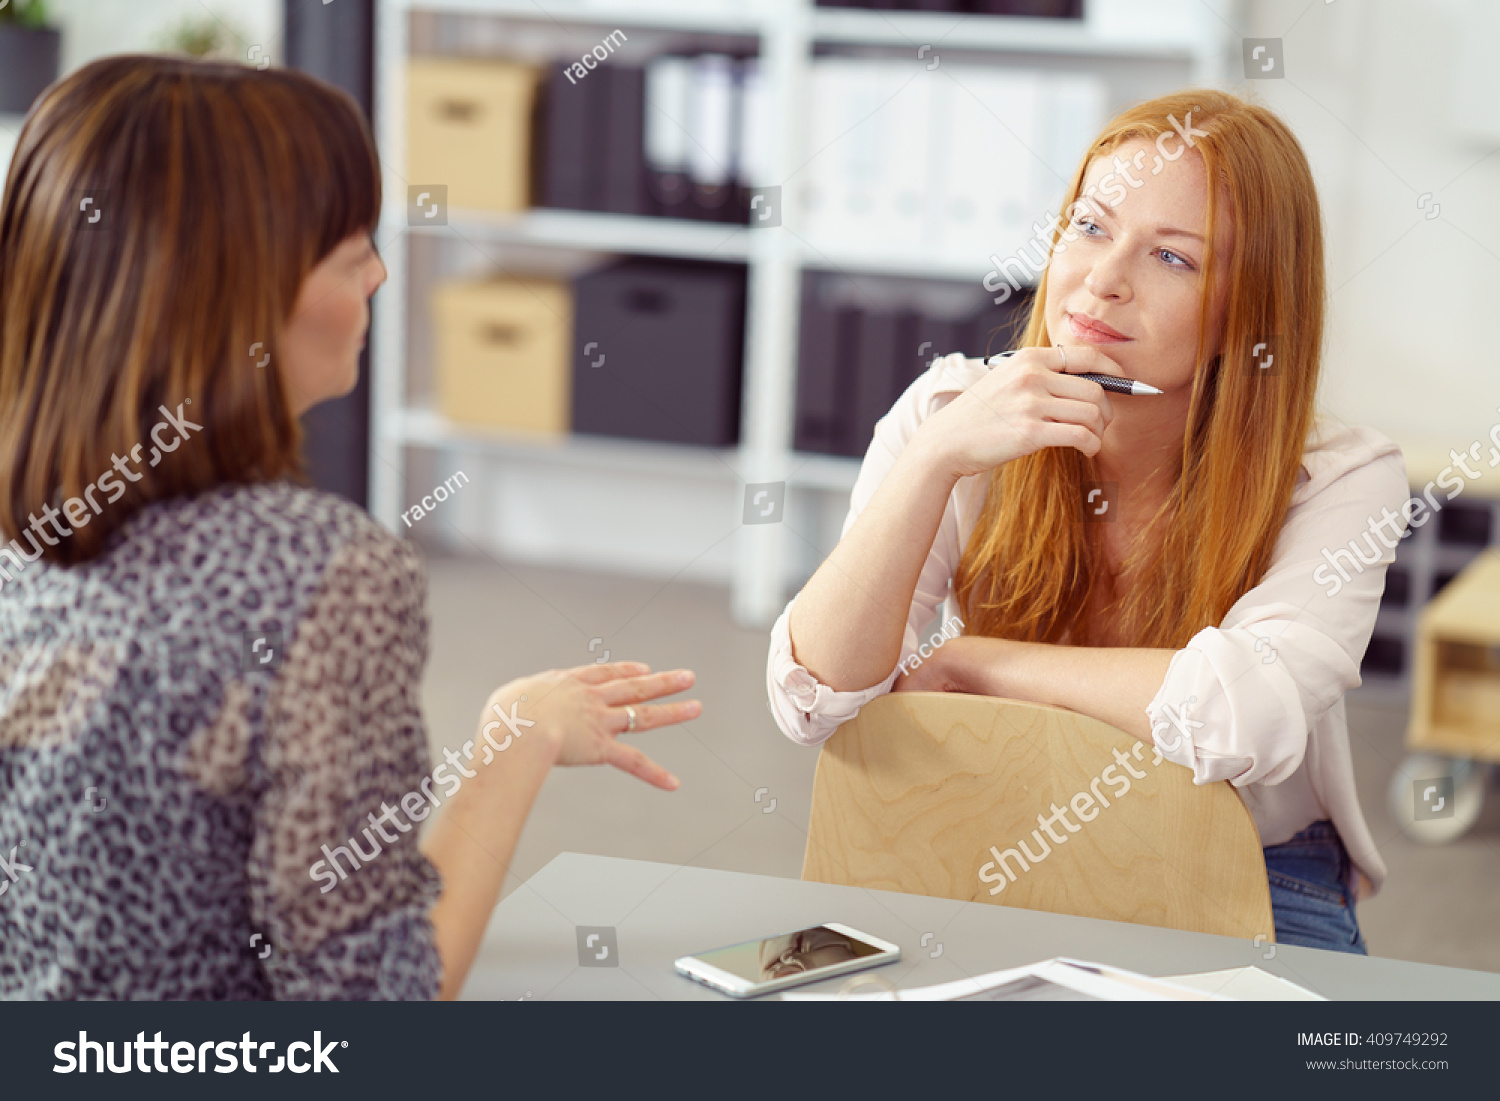 Two businesswoman having an informal meeting with one sitting relaxing on a reversed chair listening to her colleague with a pensive expression #409749292